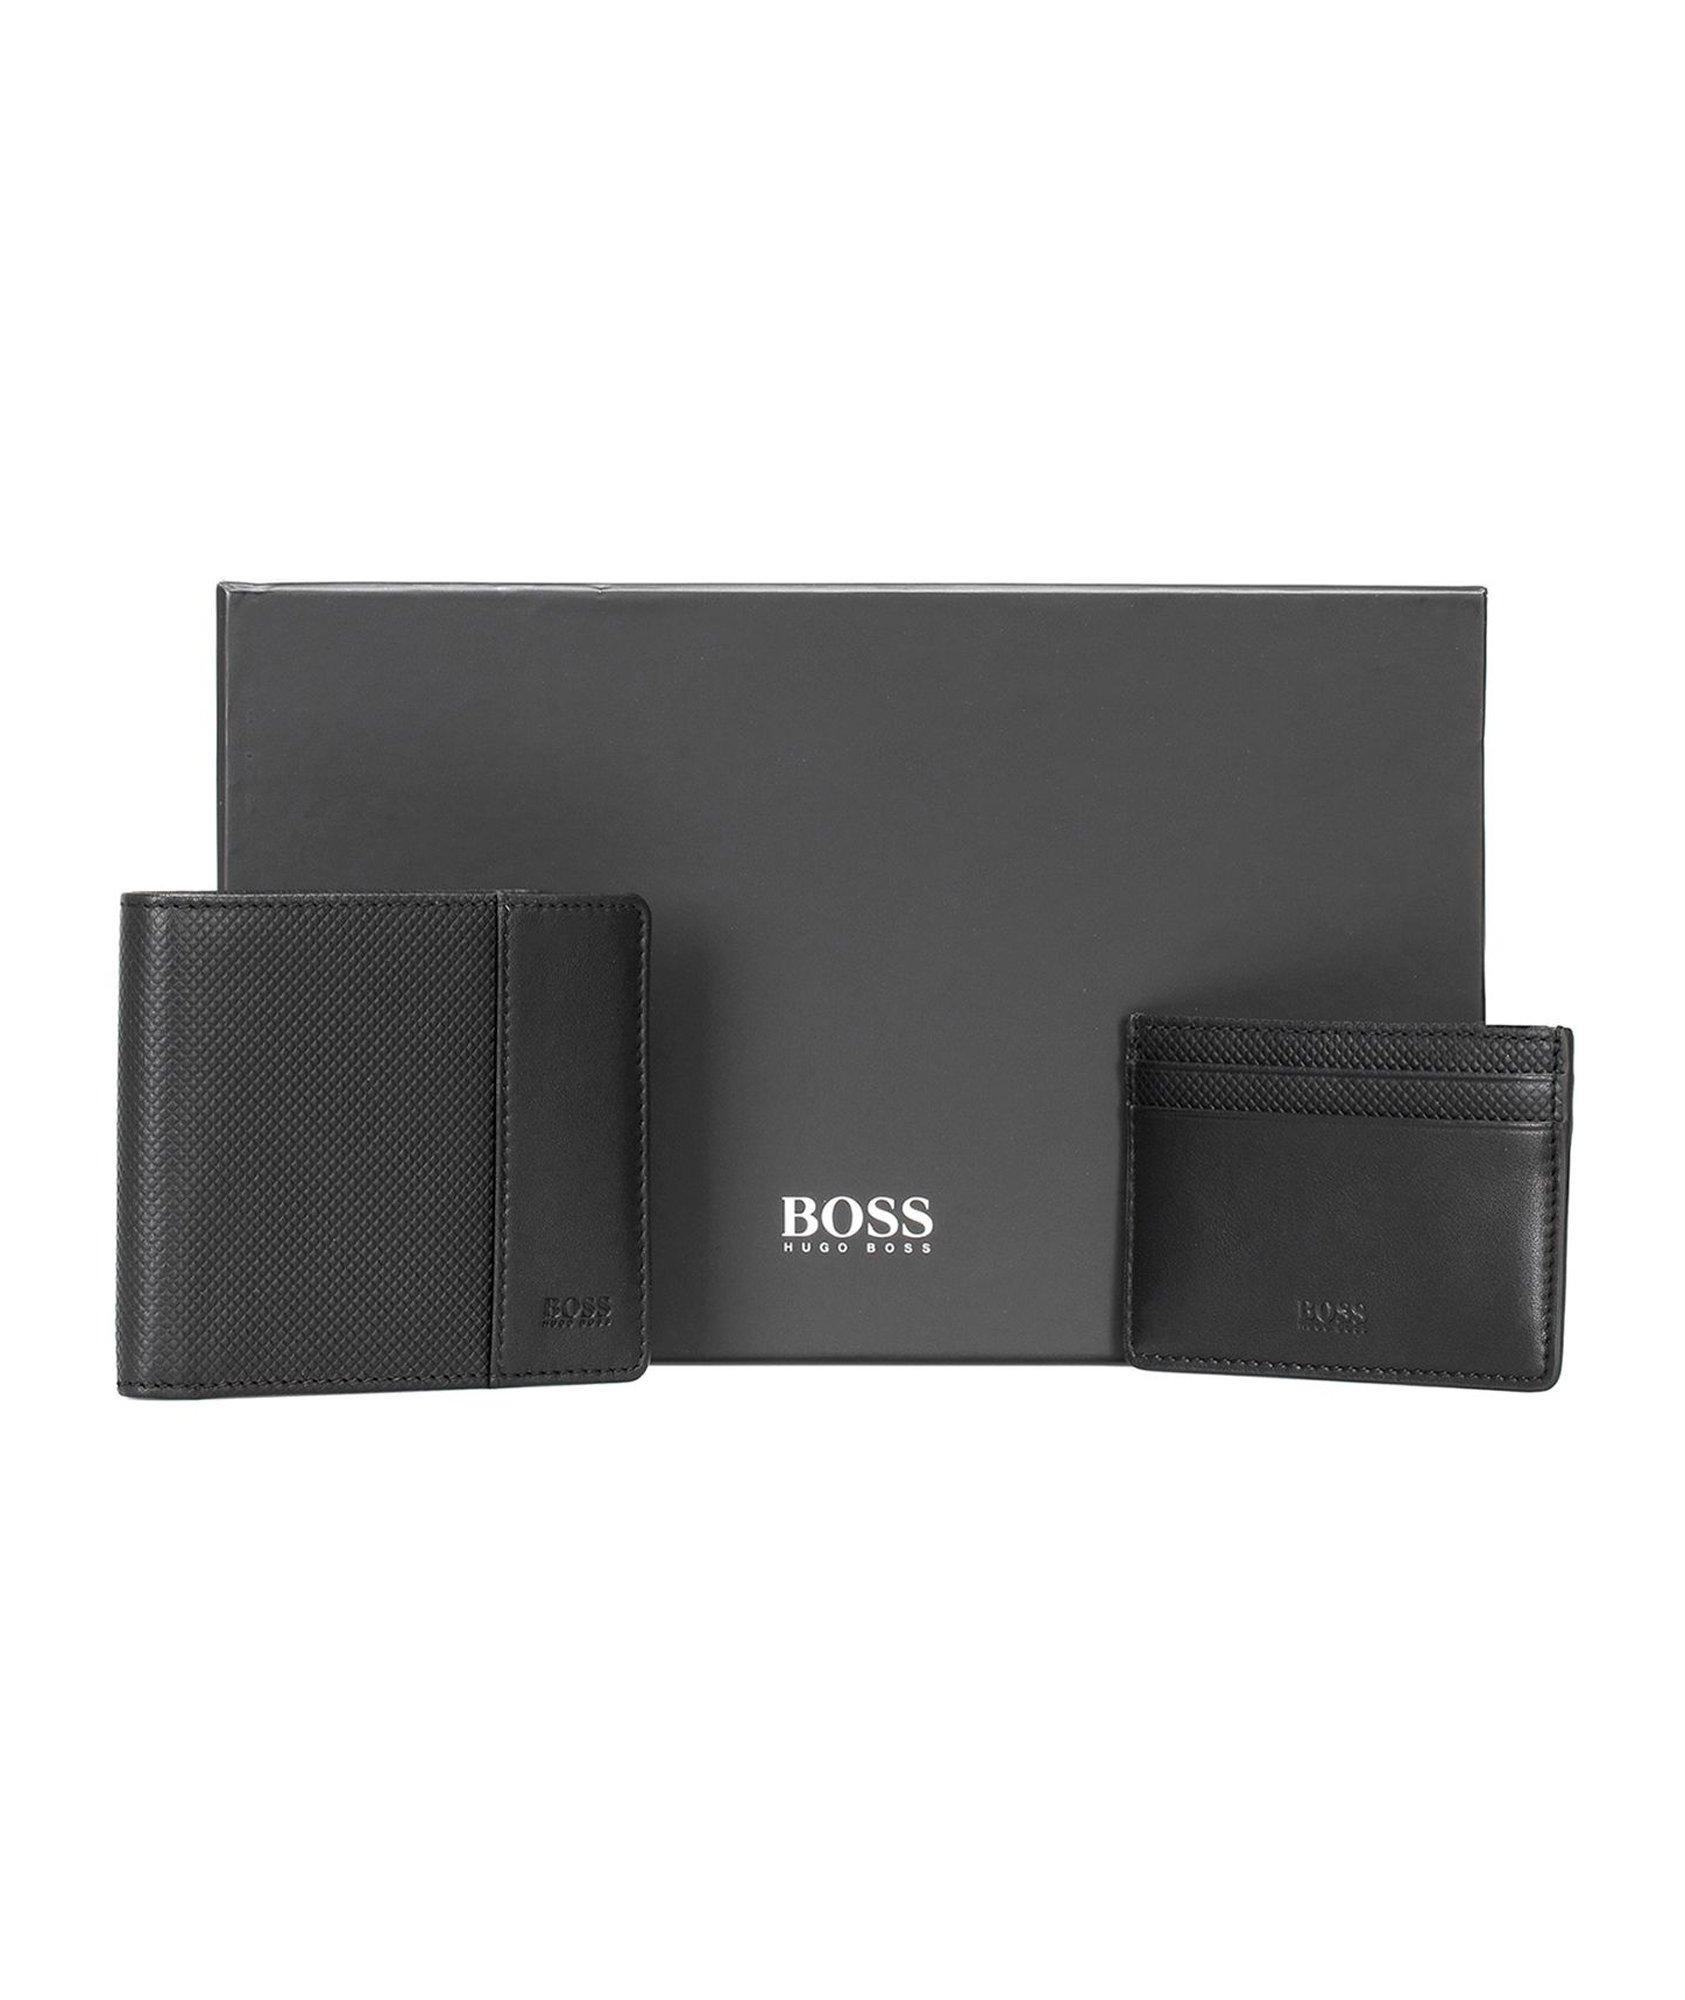 Diamond-Embossed Leather Wallet and Card Holder Gift Set image 0